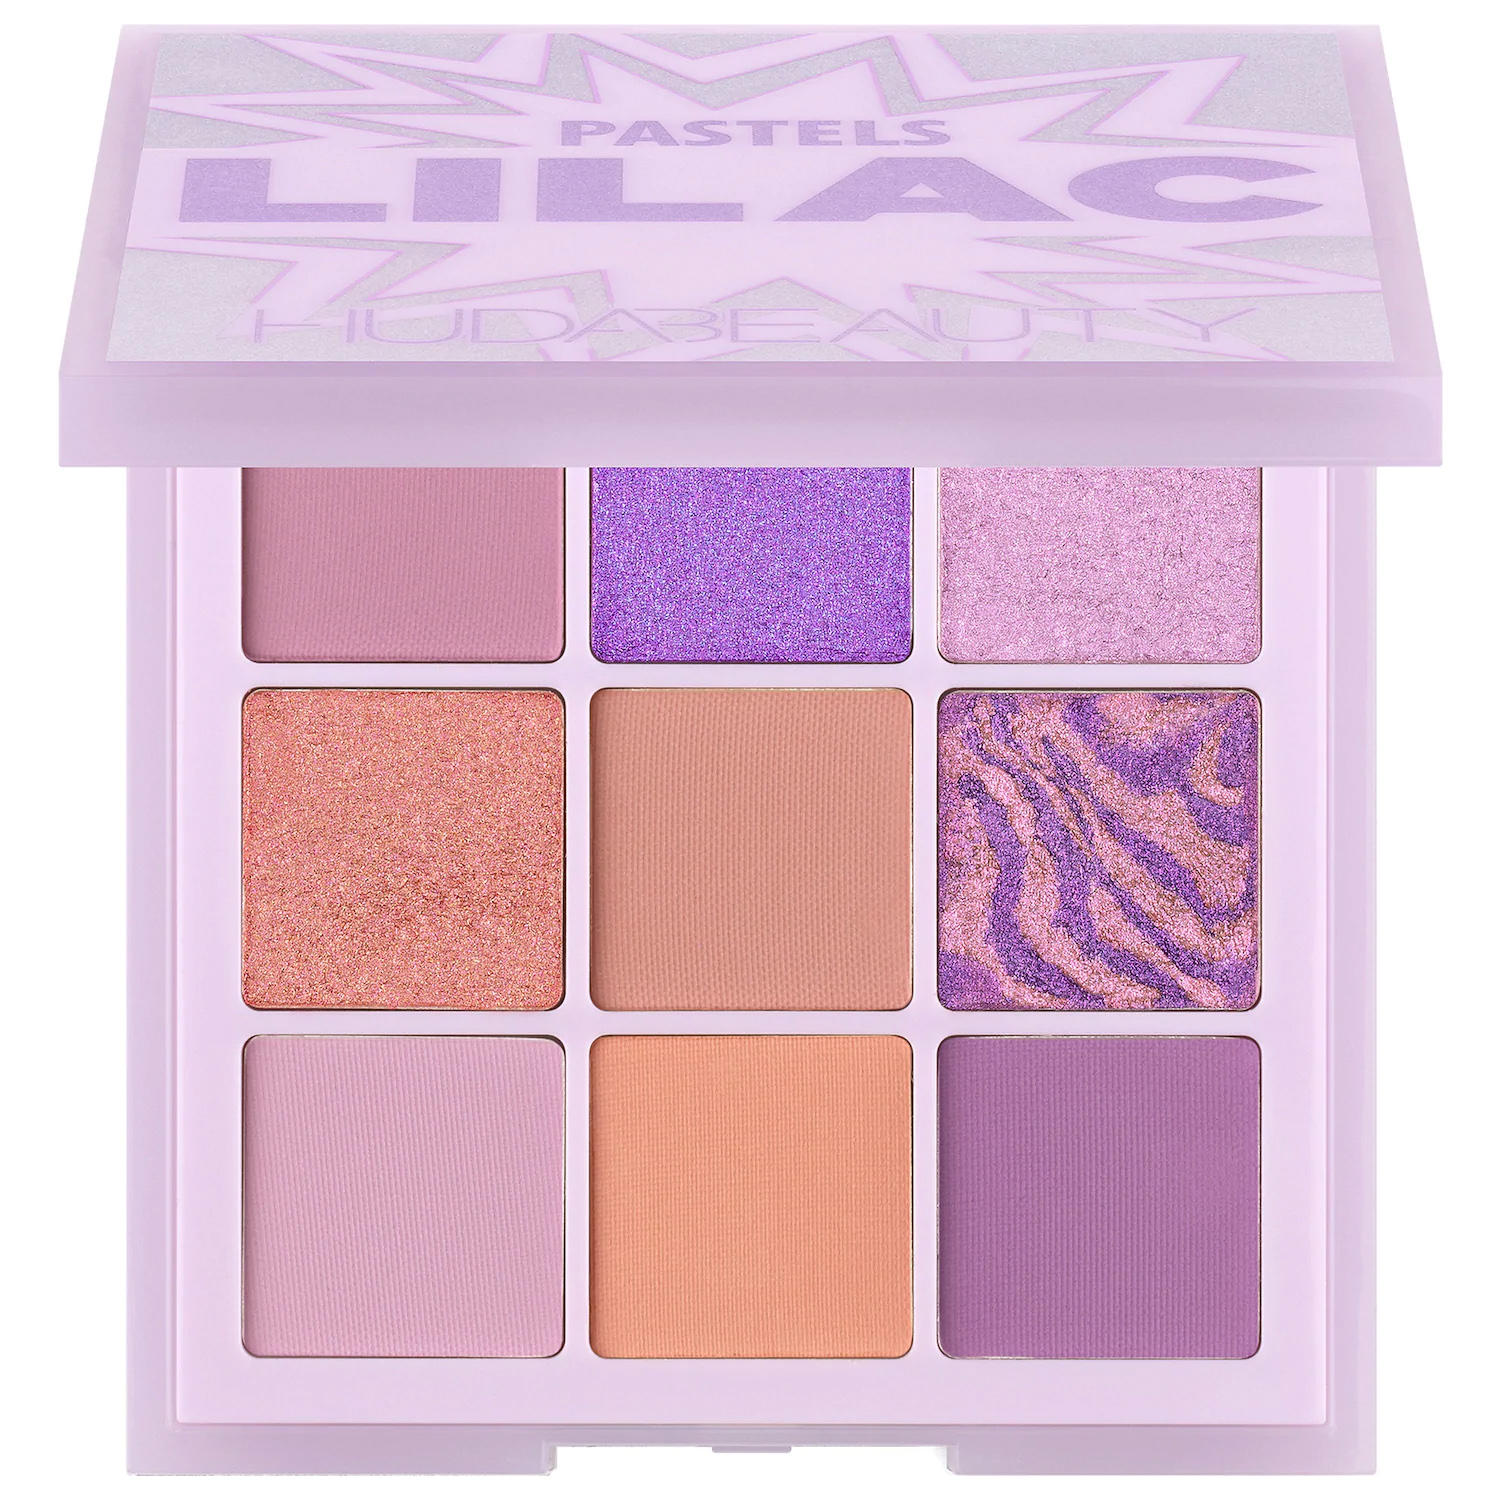 Huda Beauty Pastel Obsessions Eyeshadow Palette Lilac